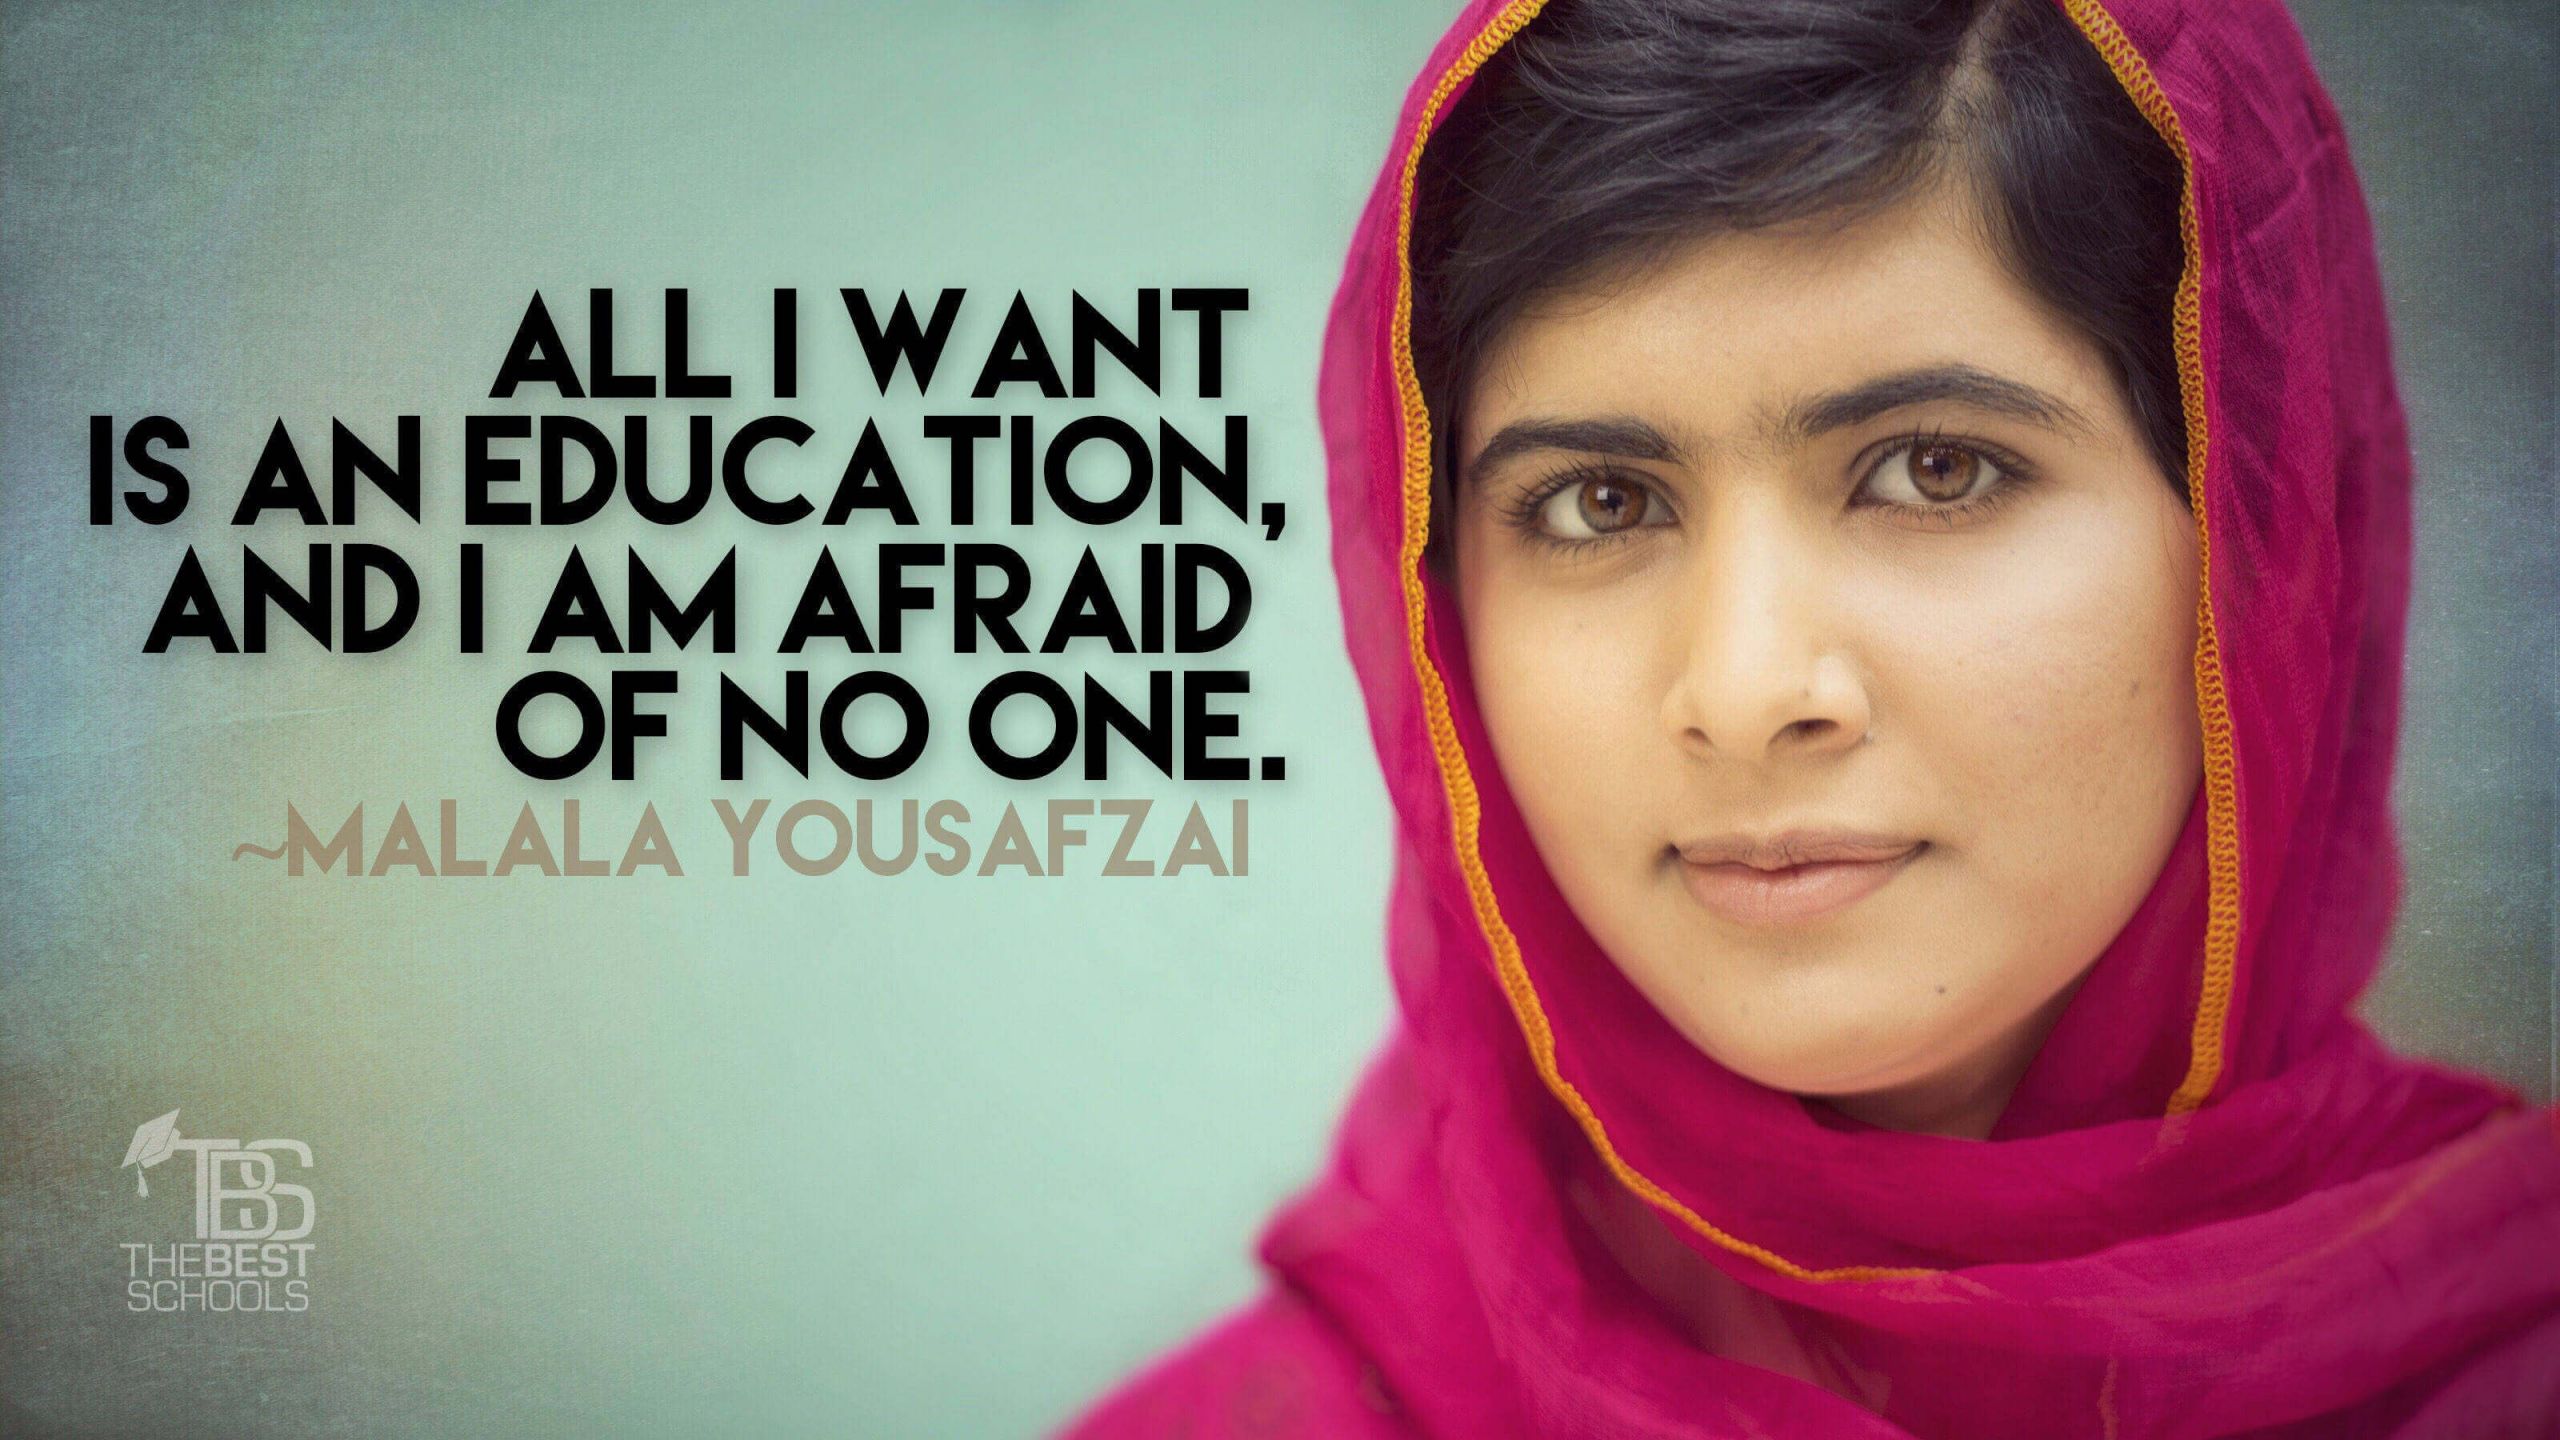 Malala Quotes Education
 “5 years ago I was shot Today I attend my first lectures at Oxford ” Malala Yousafzai s